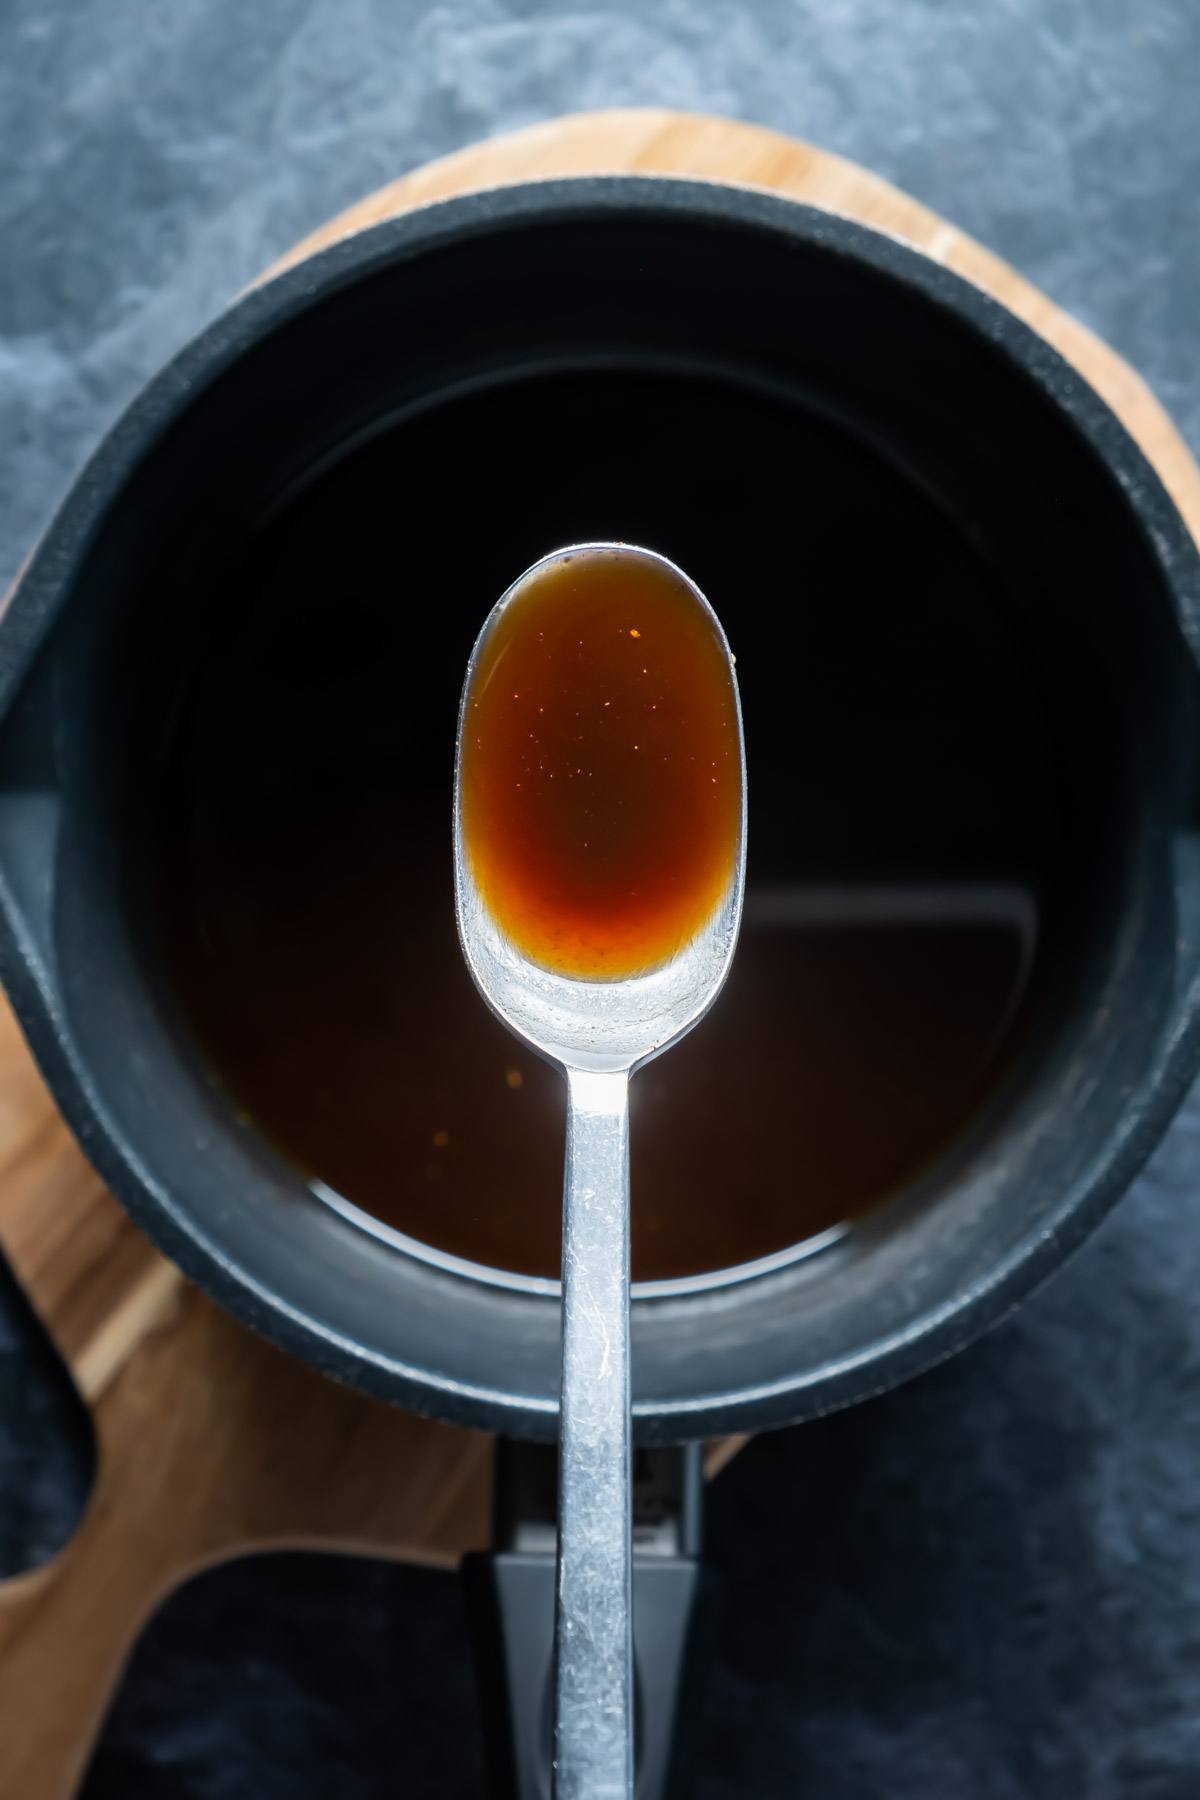 Vegan worcestershire sauce in a saucepan with a spoon.